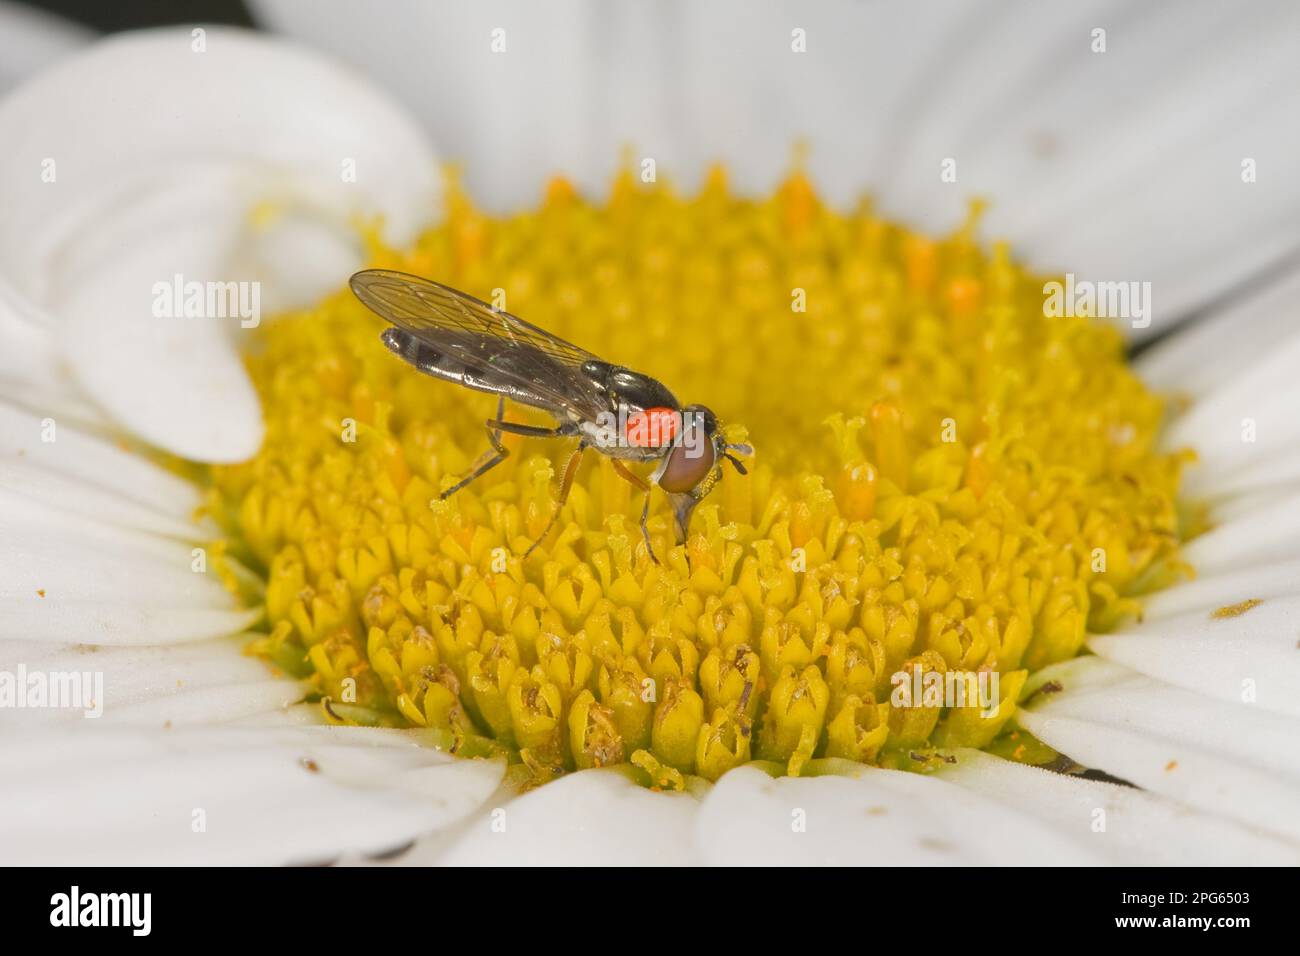 Pale-footed Hoverfly (Platycheirus albimanus) adult, feeding on pollen from flower, with parasitic tick, Norfolk, England, United Kingdom Stock Photo